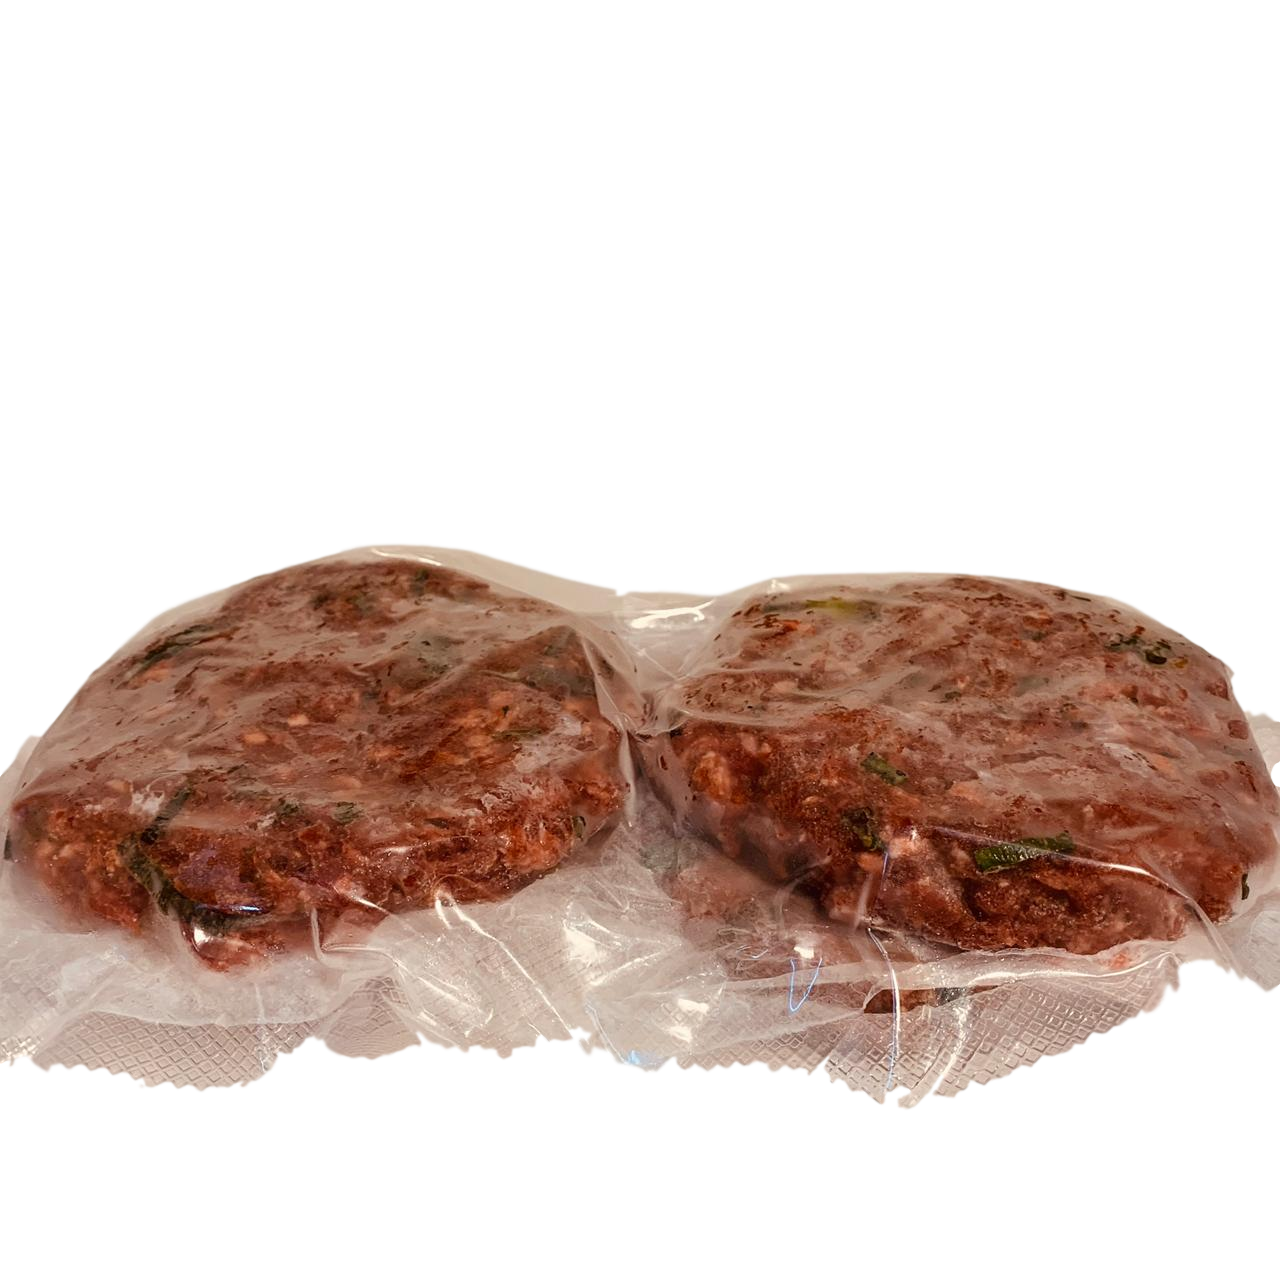 Angus ground beef, fresh basil, diced shallots, spiced with cajun seasoning, salt/pepper and bound by egg and panko which keeps meat tender and juicy even when cooked to medium-well.